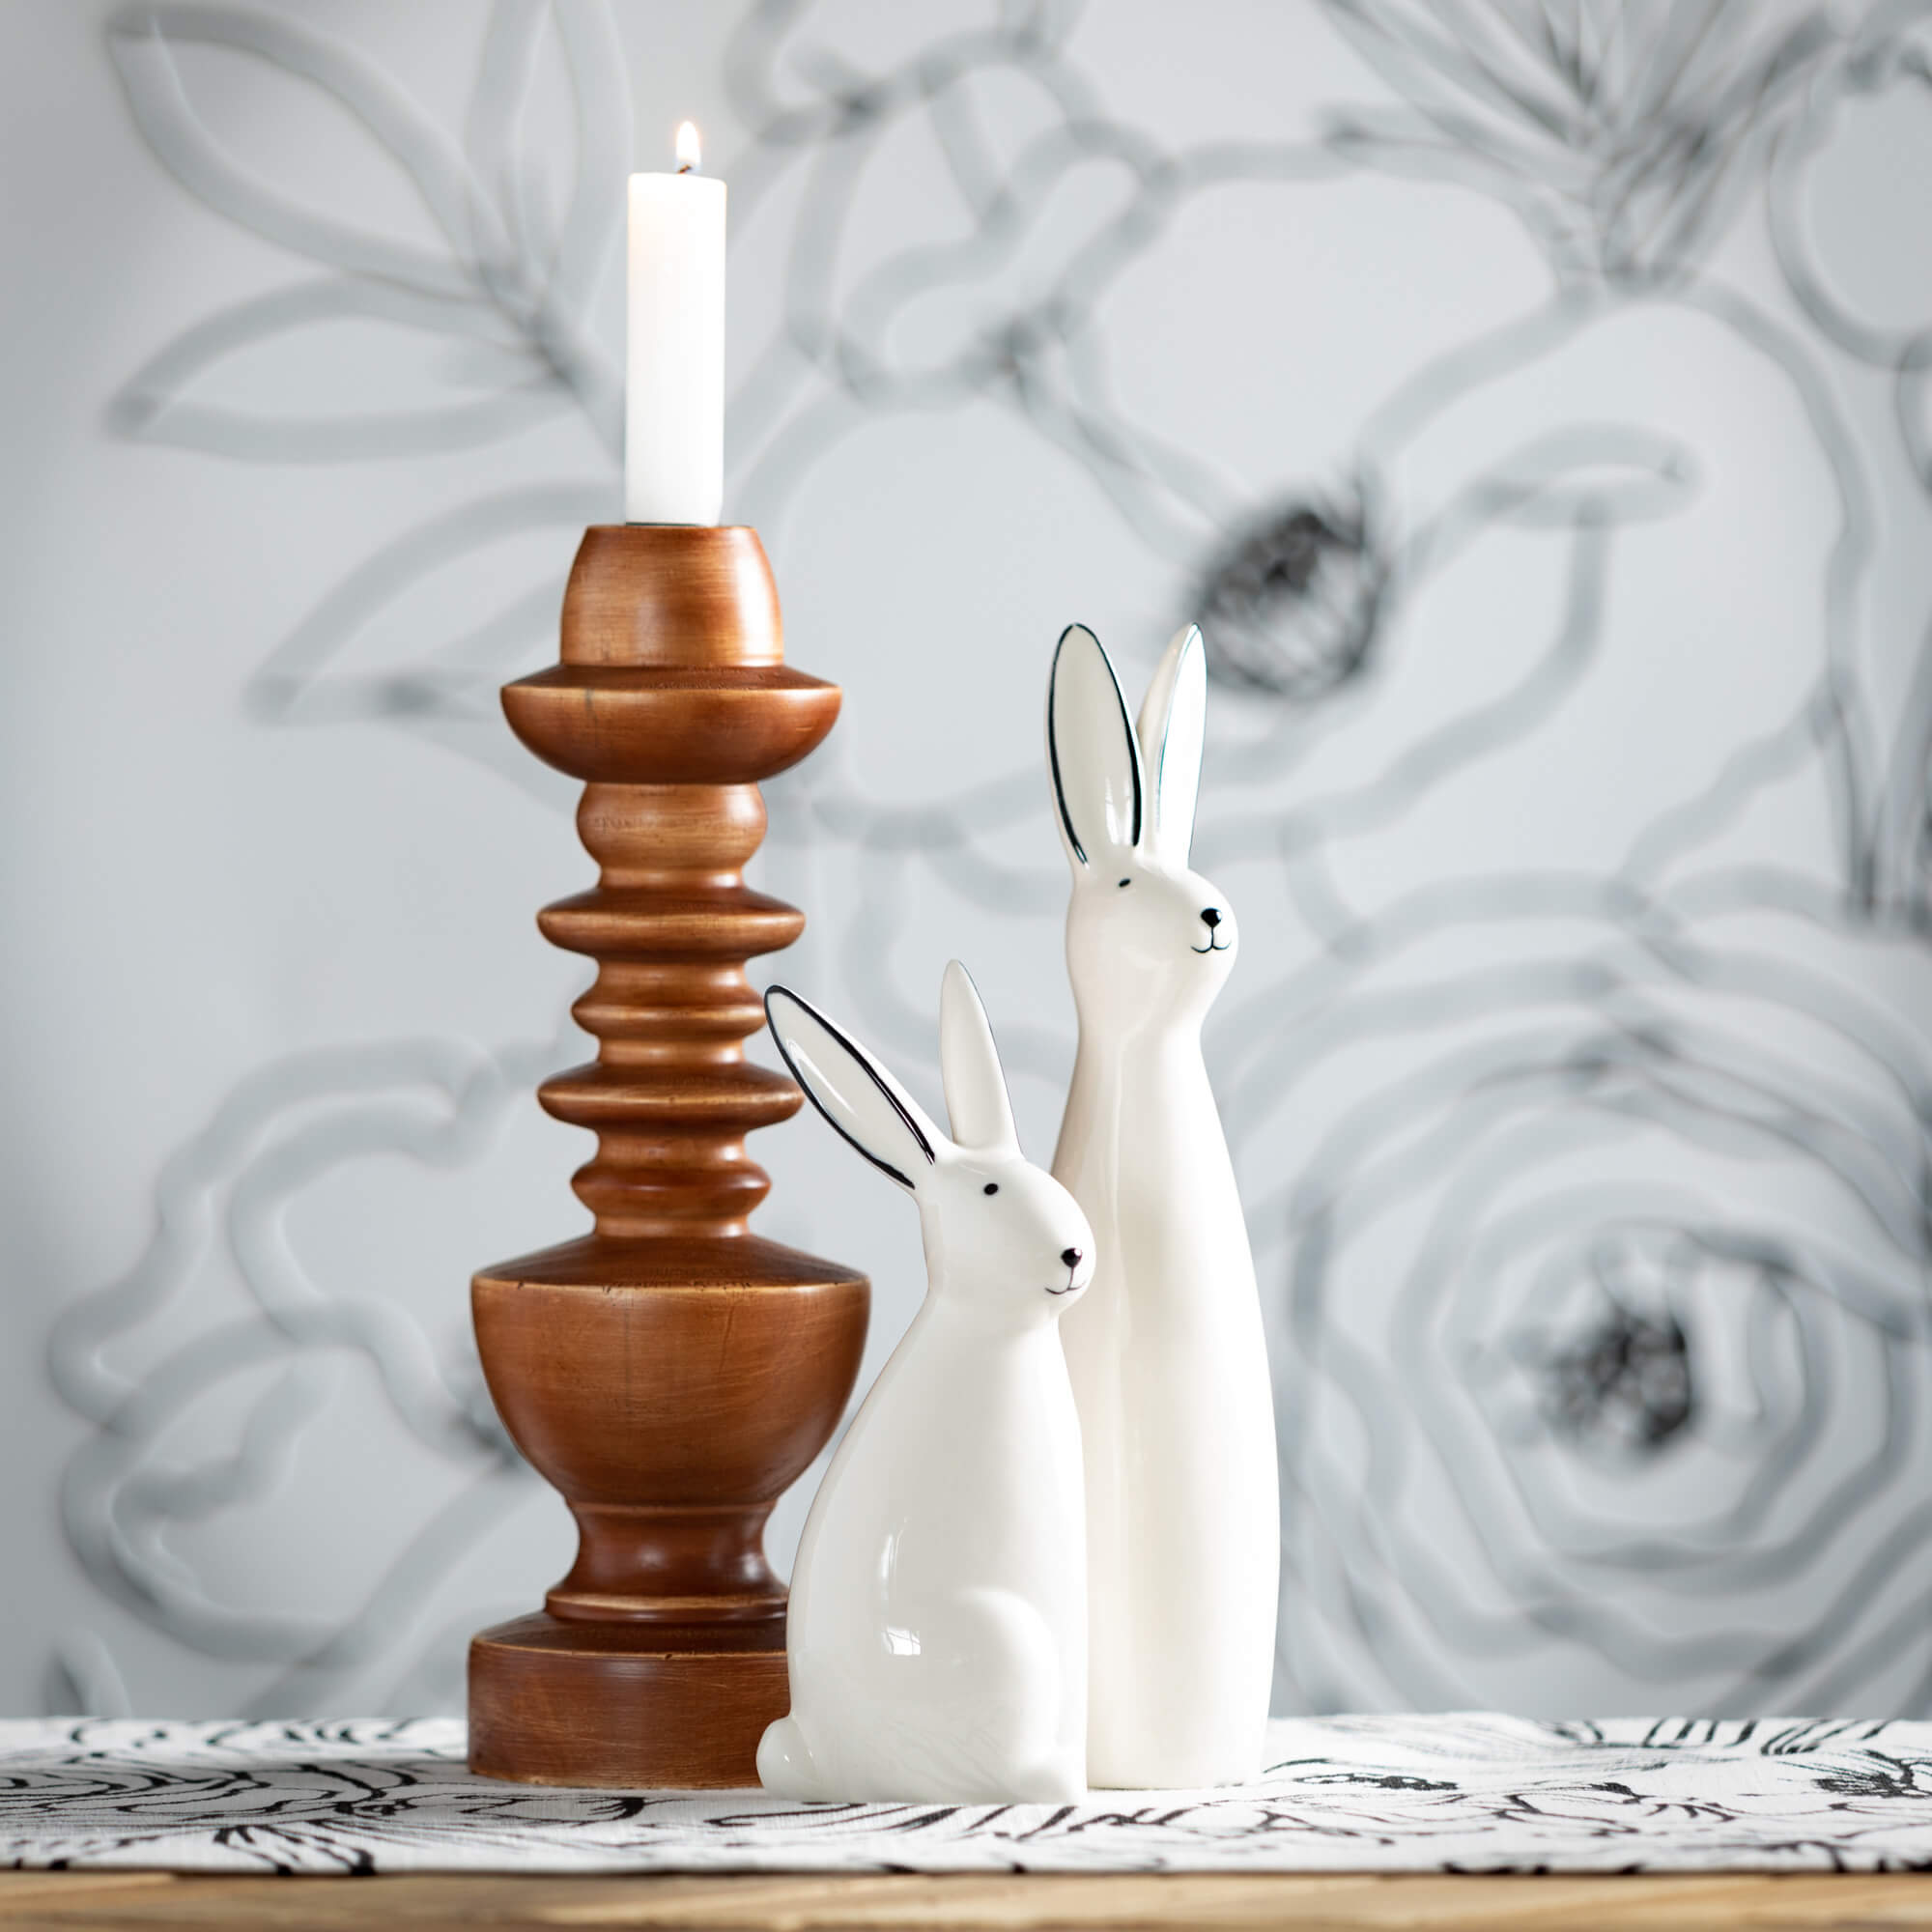 Abstract Porcelain Bunny Set